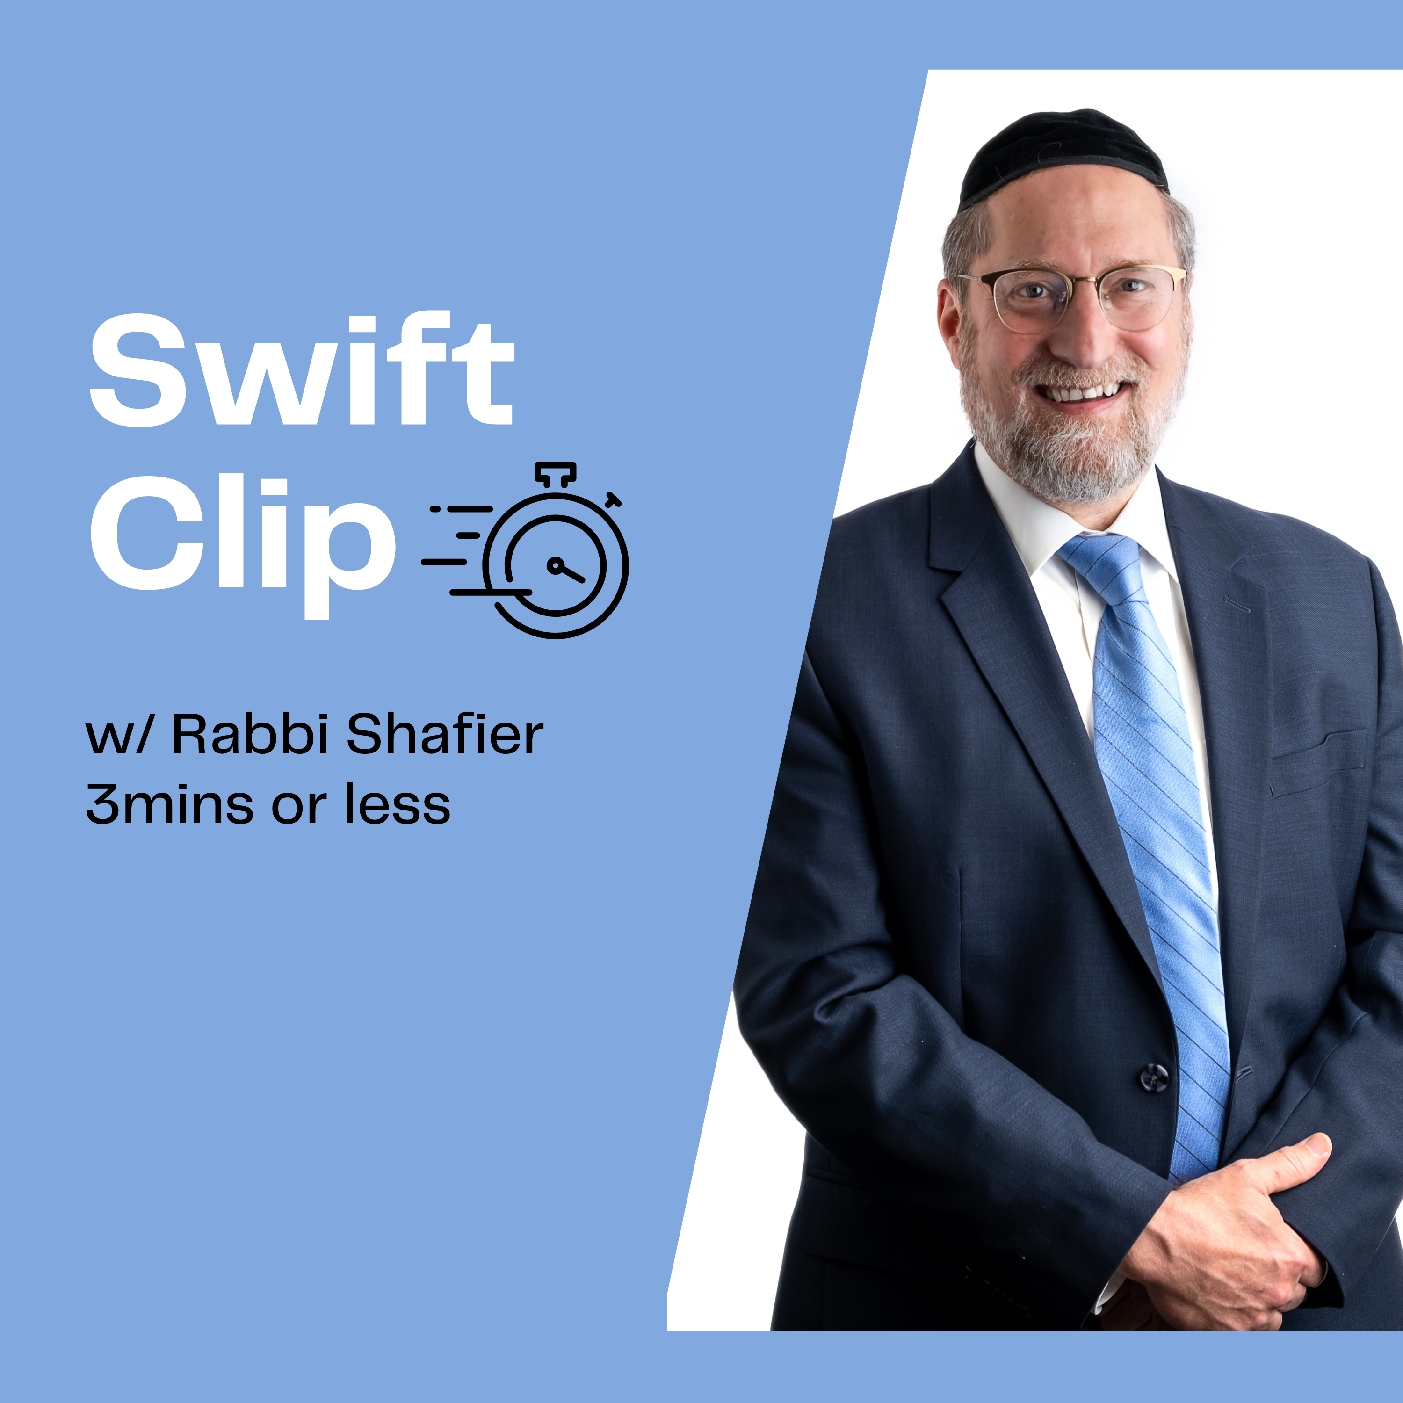 Keeping Kosher to Strengthen Who We Are